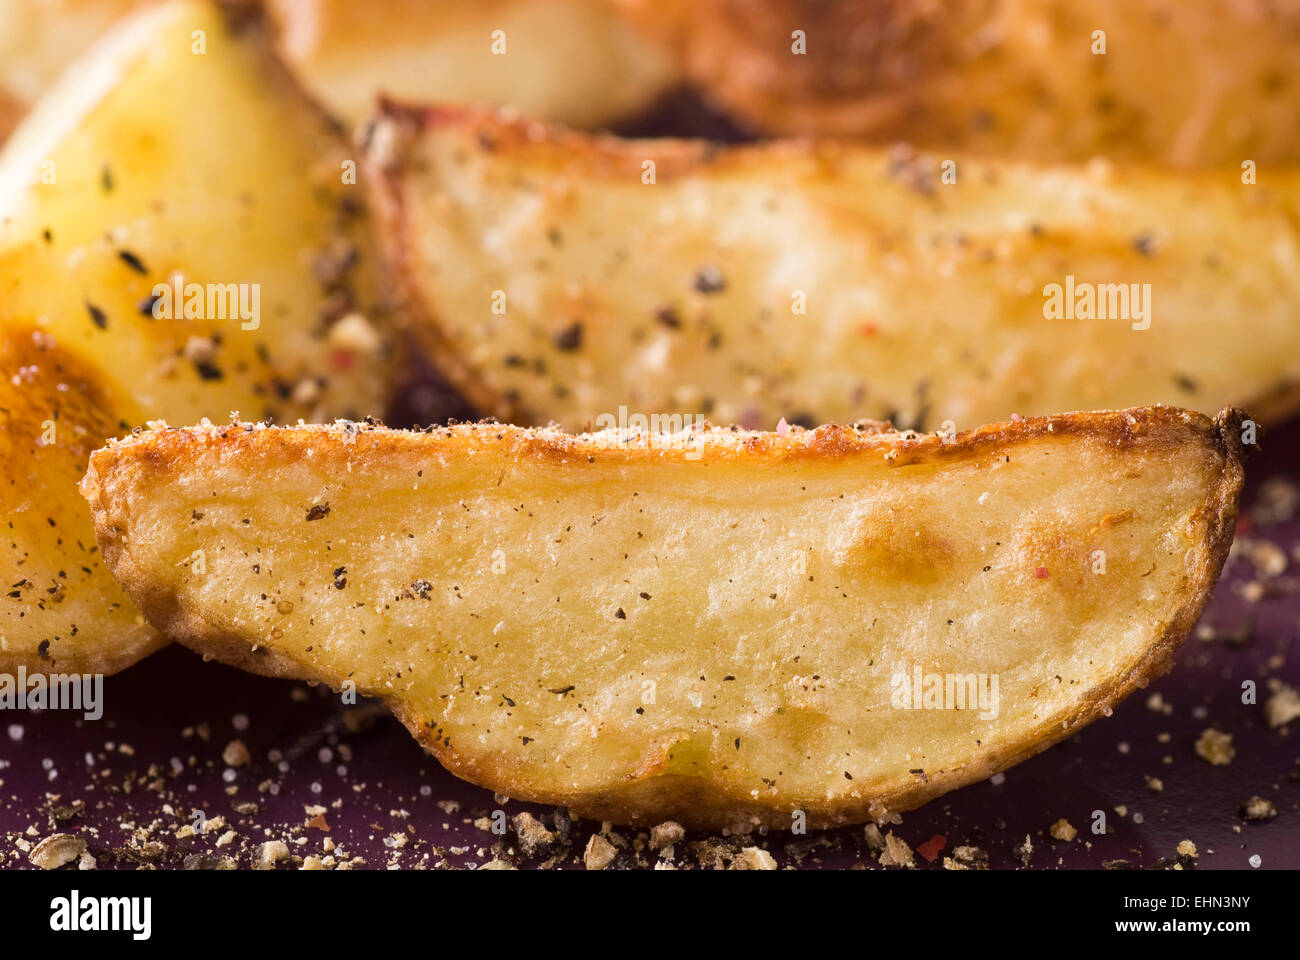 Roasted potato with salt and red, black and white pepper. Stock Photo